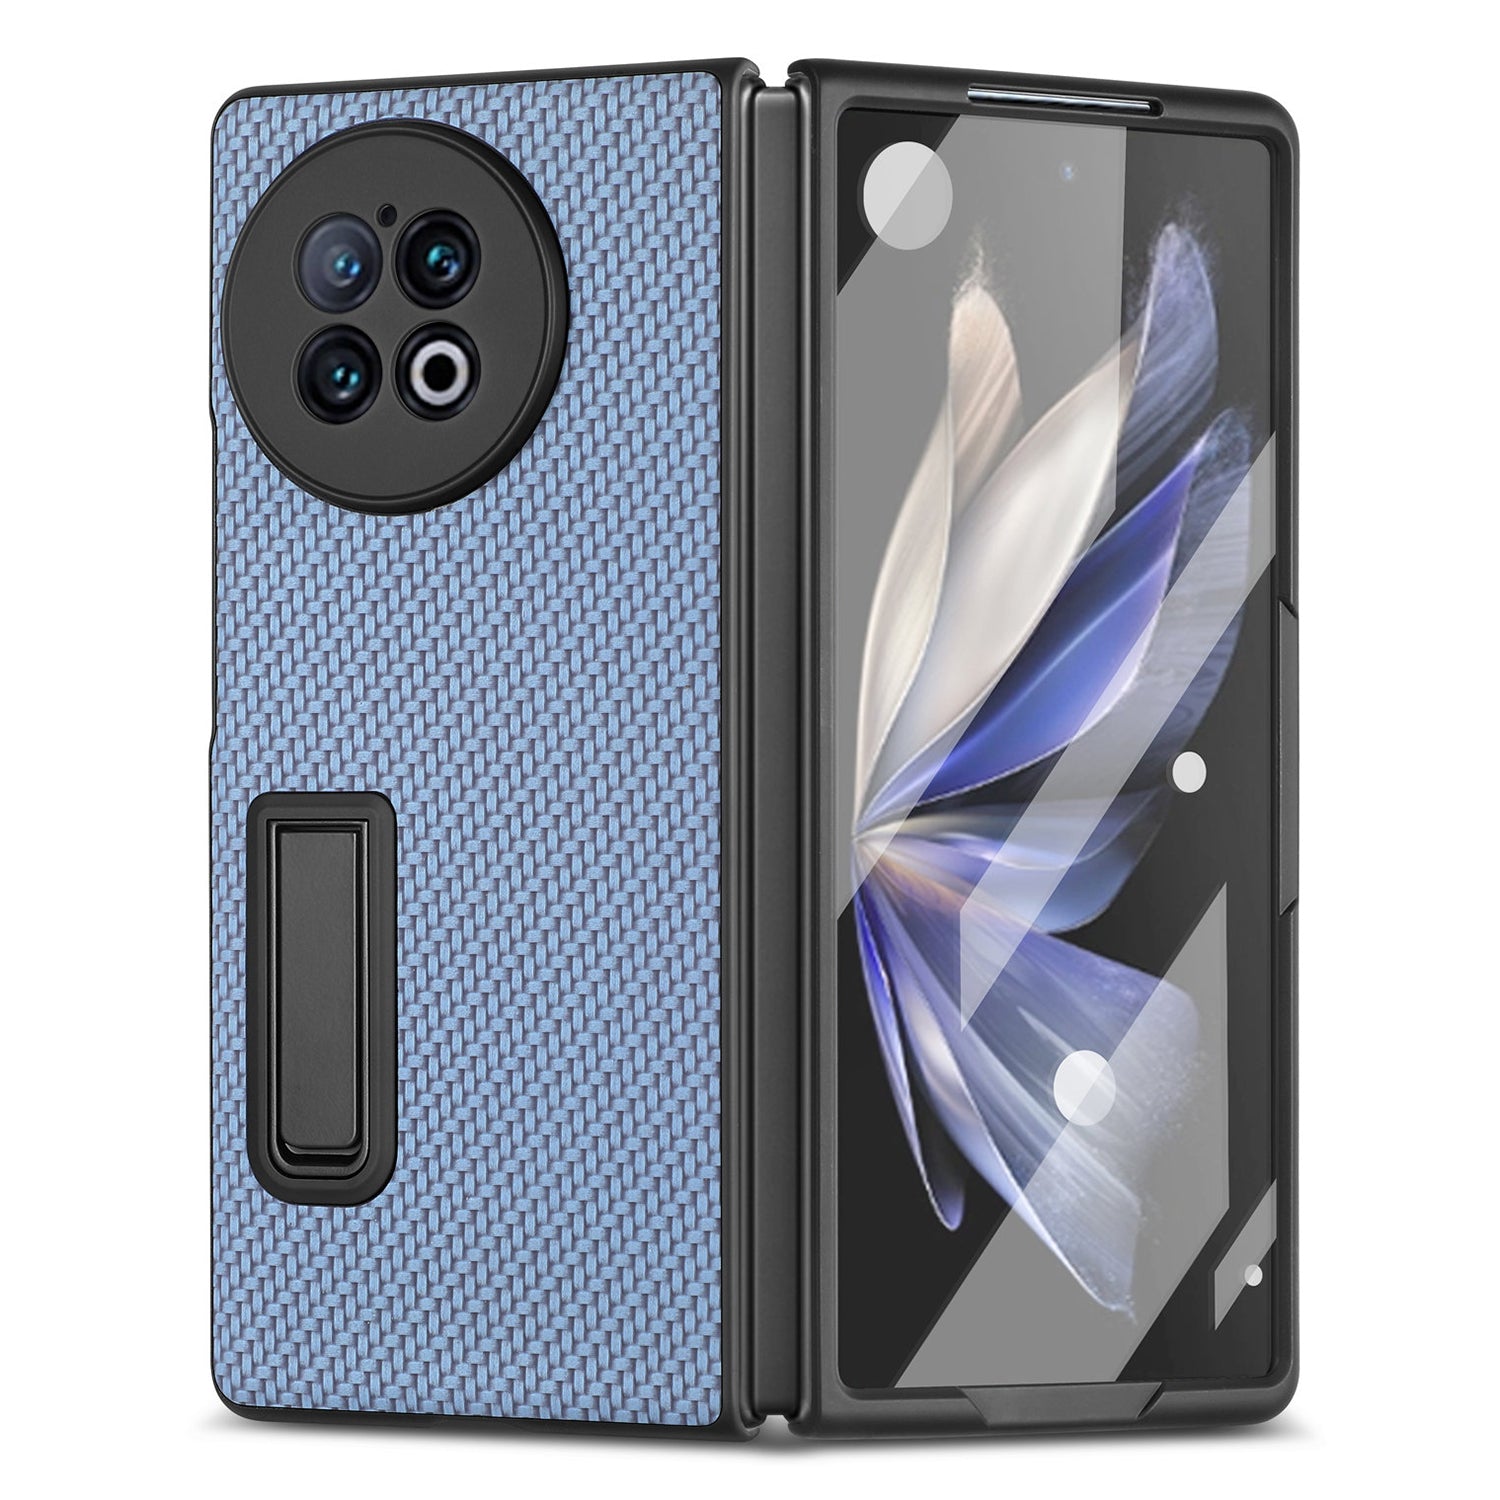 For vivo X Fold2 PU Leather+PC Protective Case Kickstand Carbon Fiber Texture Phone Cover with Tempered Glass Film - Dark Blue